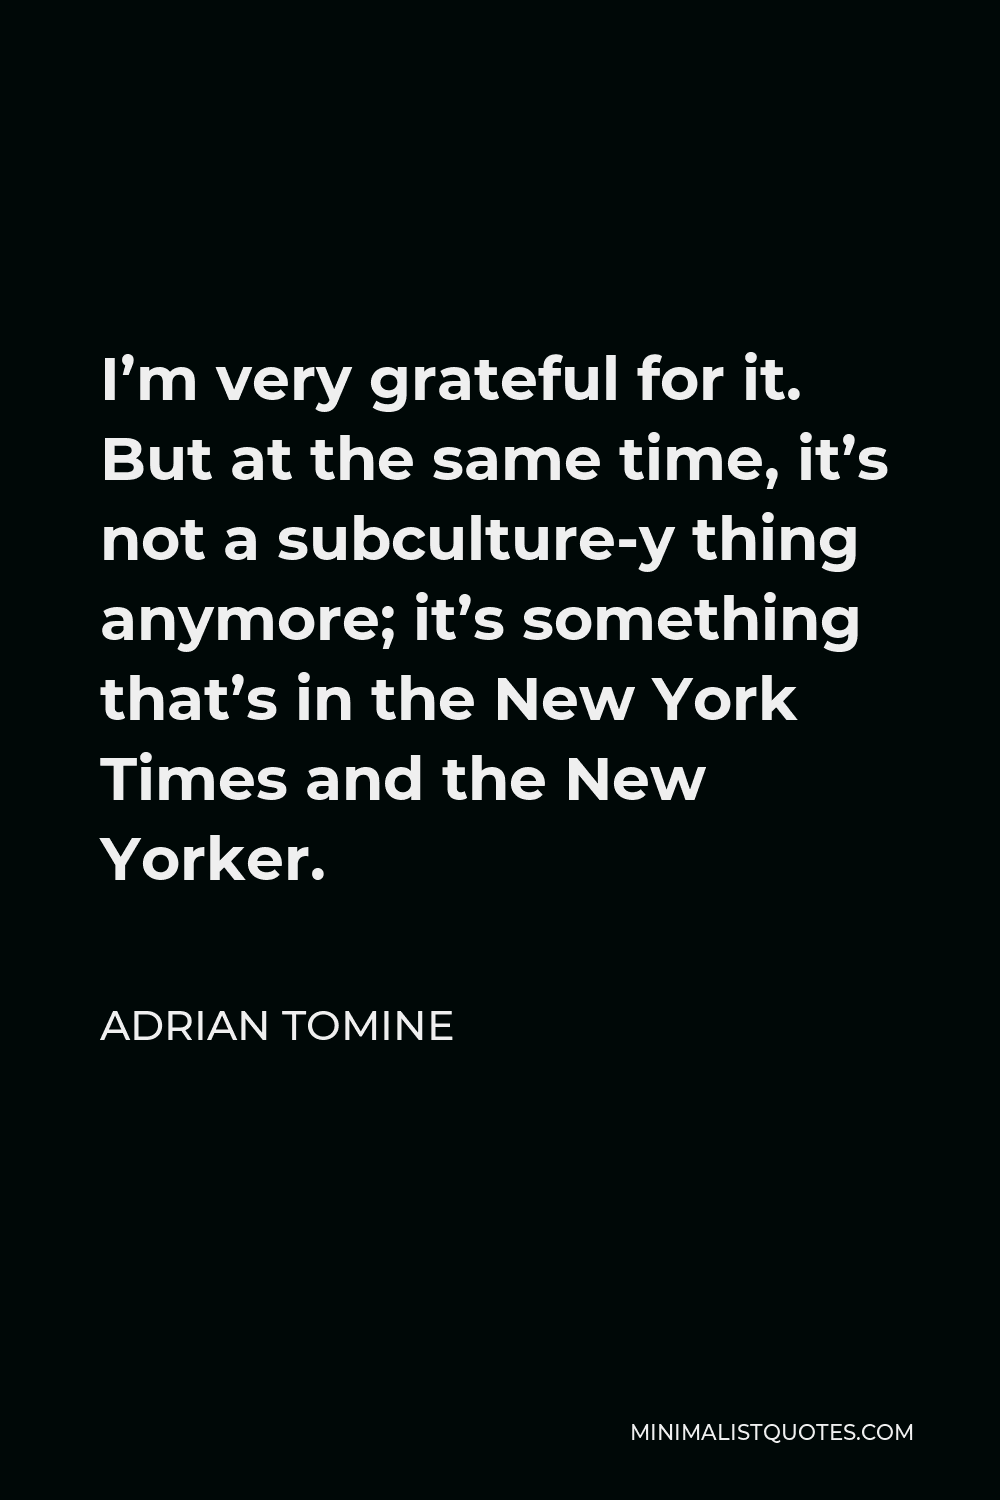 Adrian Tomine Quote - I’m very grateful for it. But at the same time, it’s not a subculture-y thing anymore; it’s something that’s in the New York Times and the New Yorker.